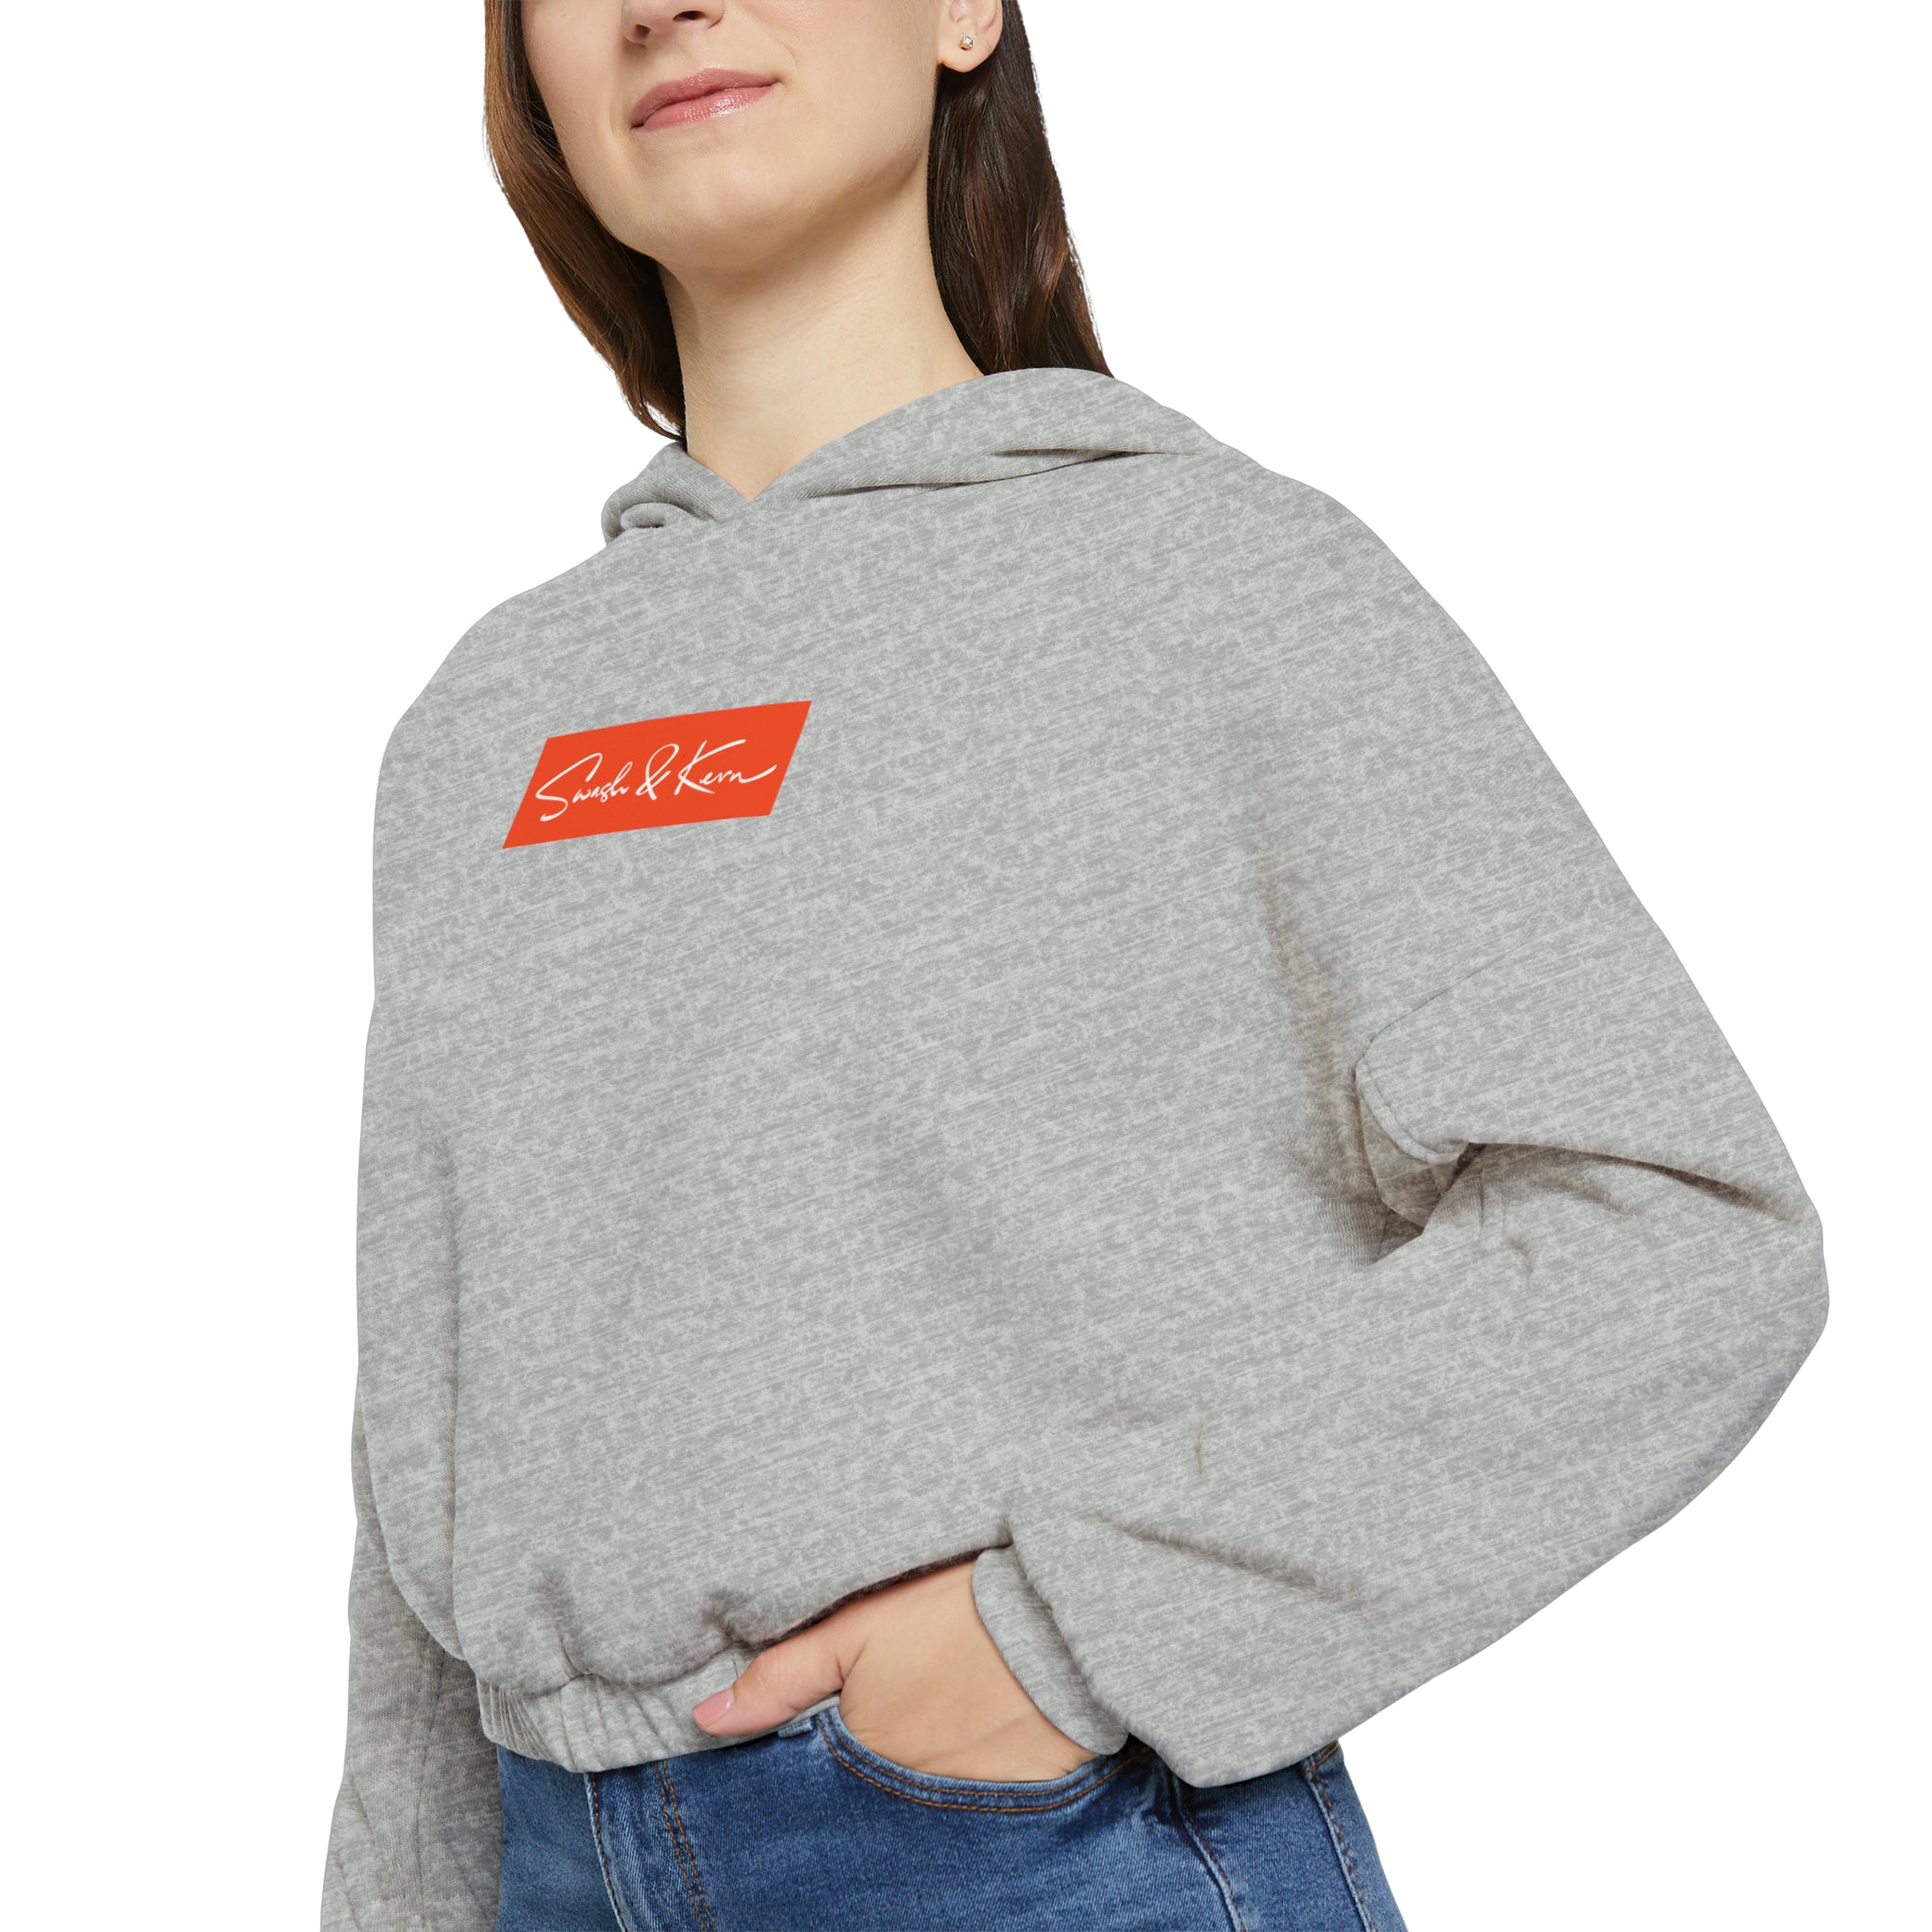 For The Love Of Letters Superscript Cinched Hoodie